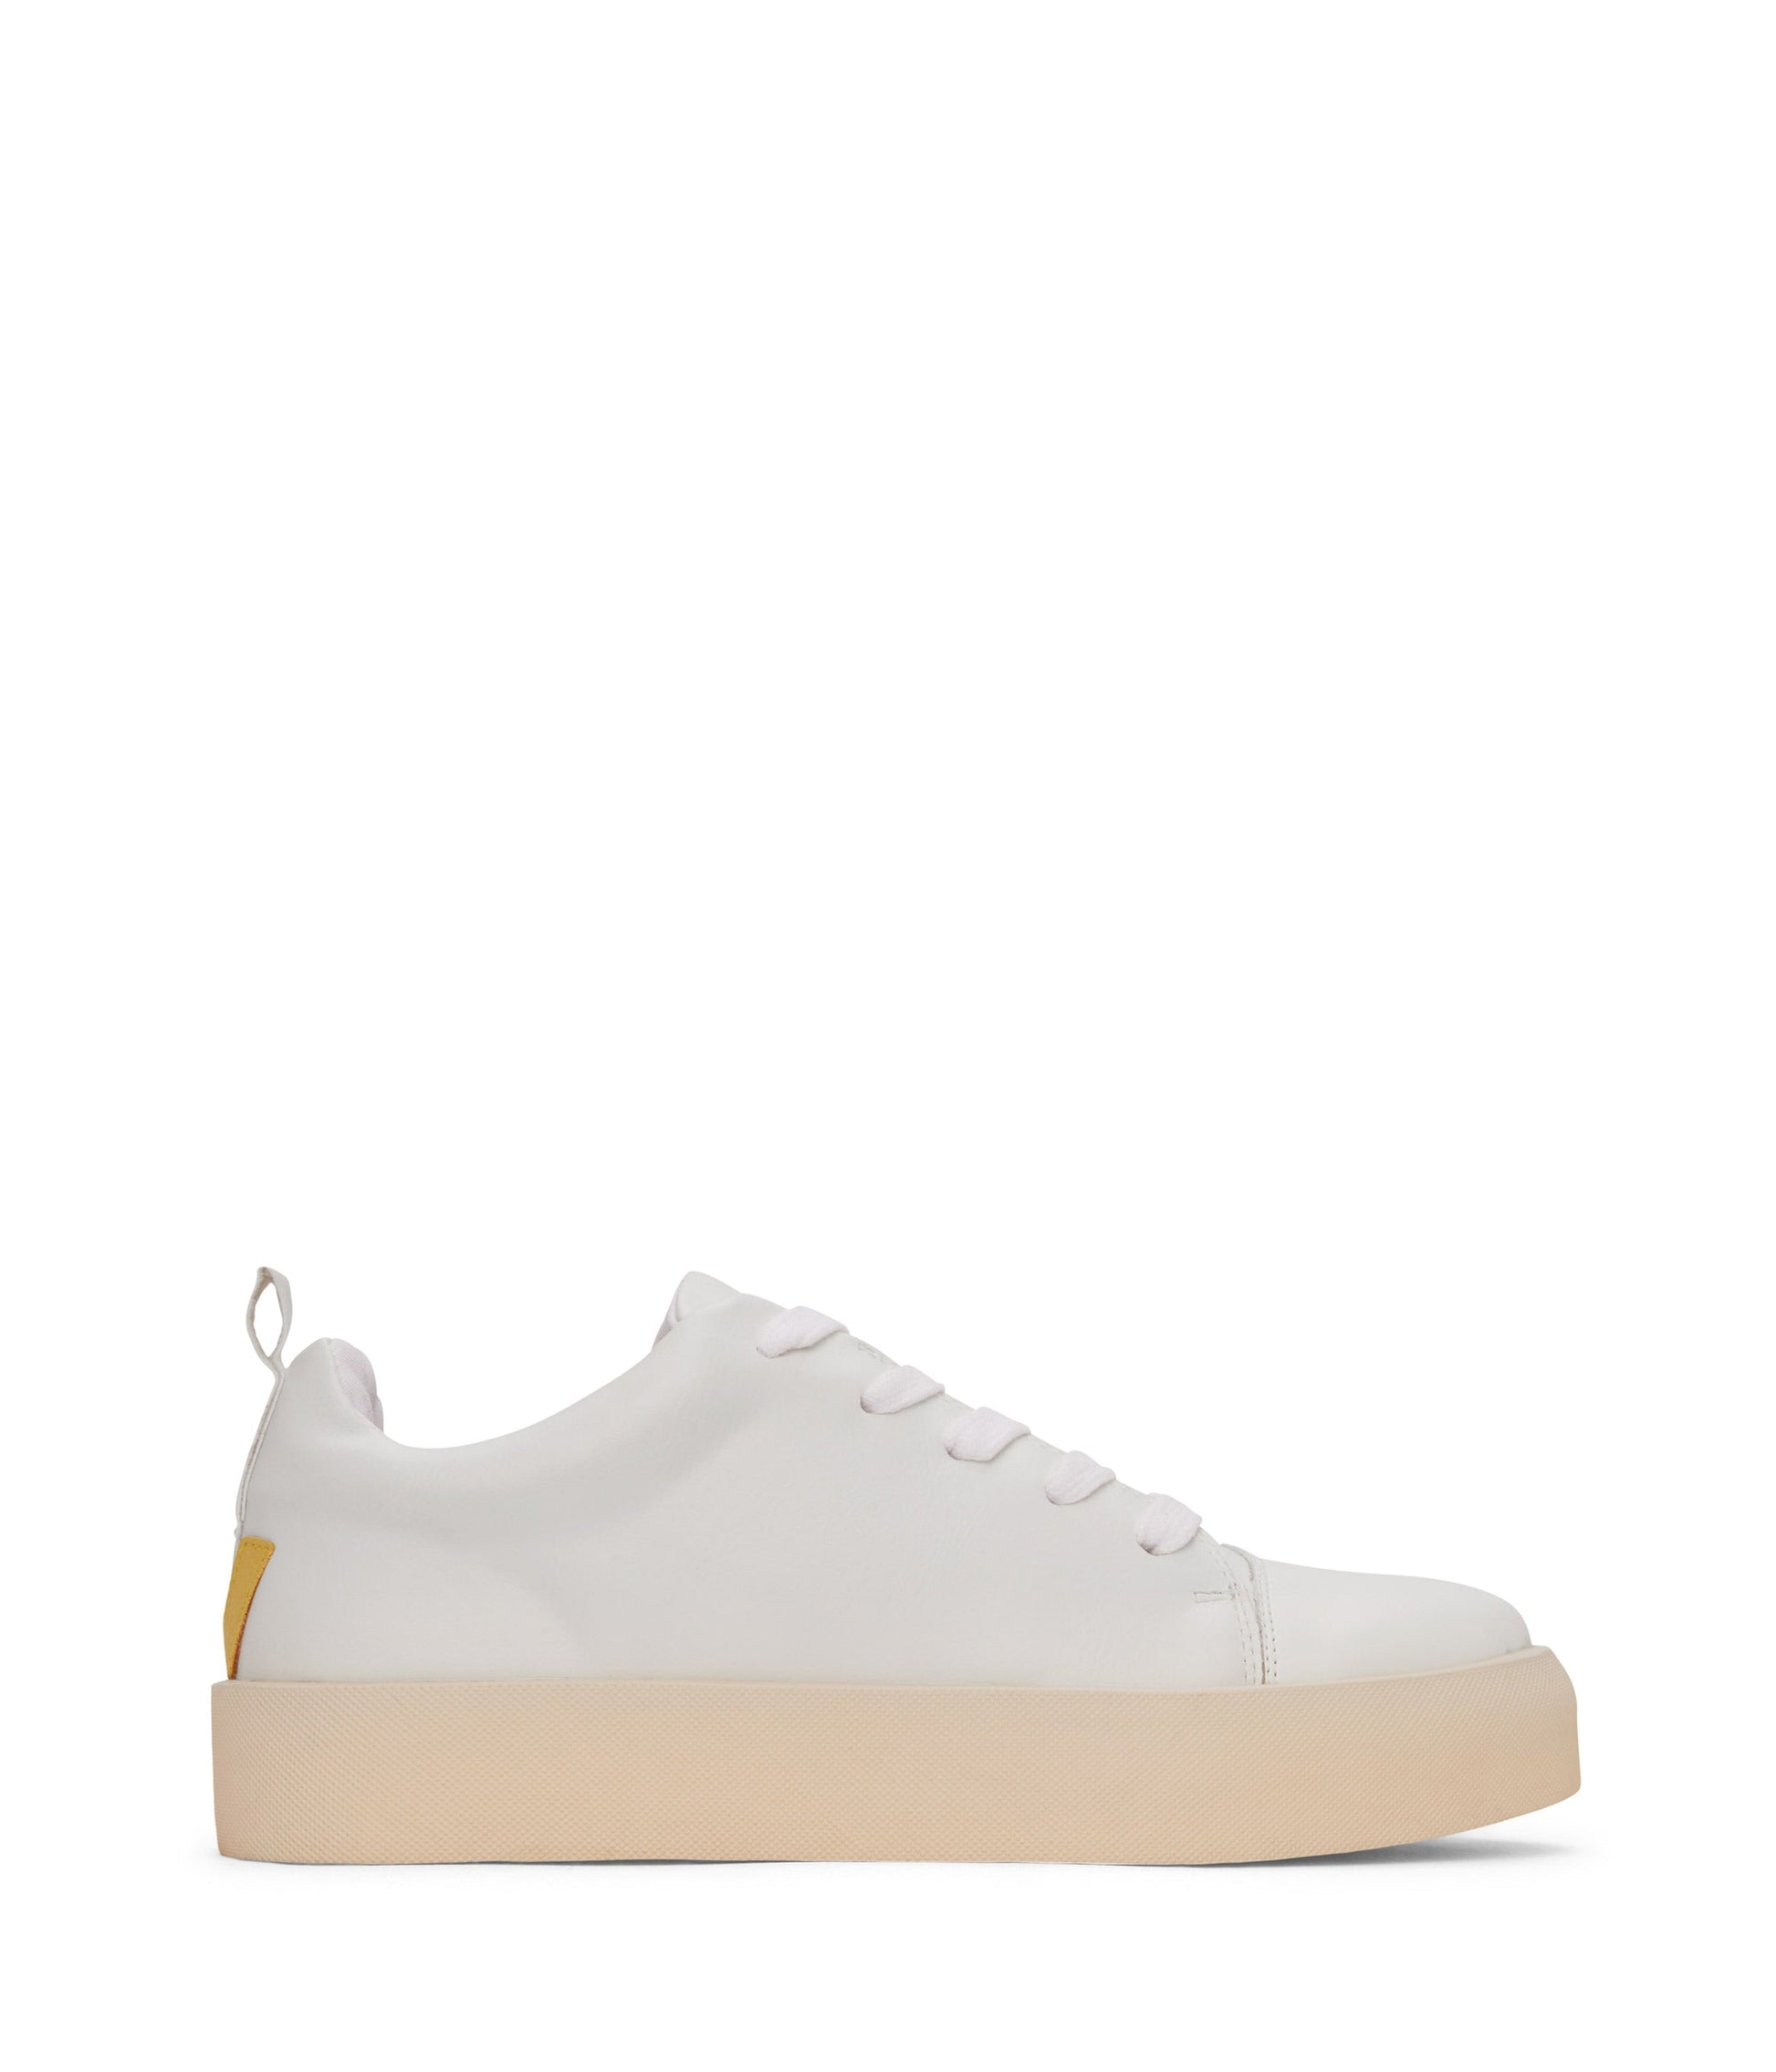 MARCI Women's Vegan Sneakers | Color: White, Yellow - variant::whiyellow